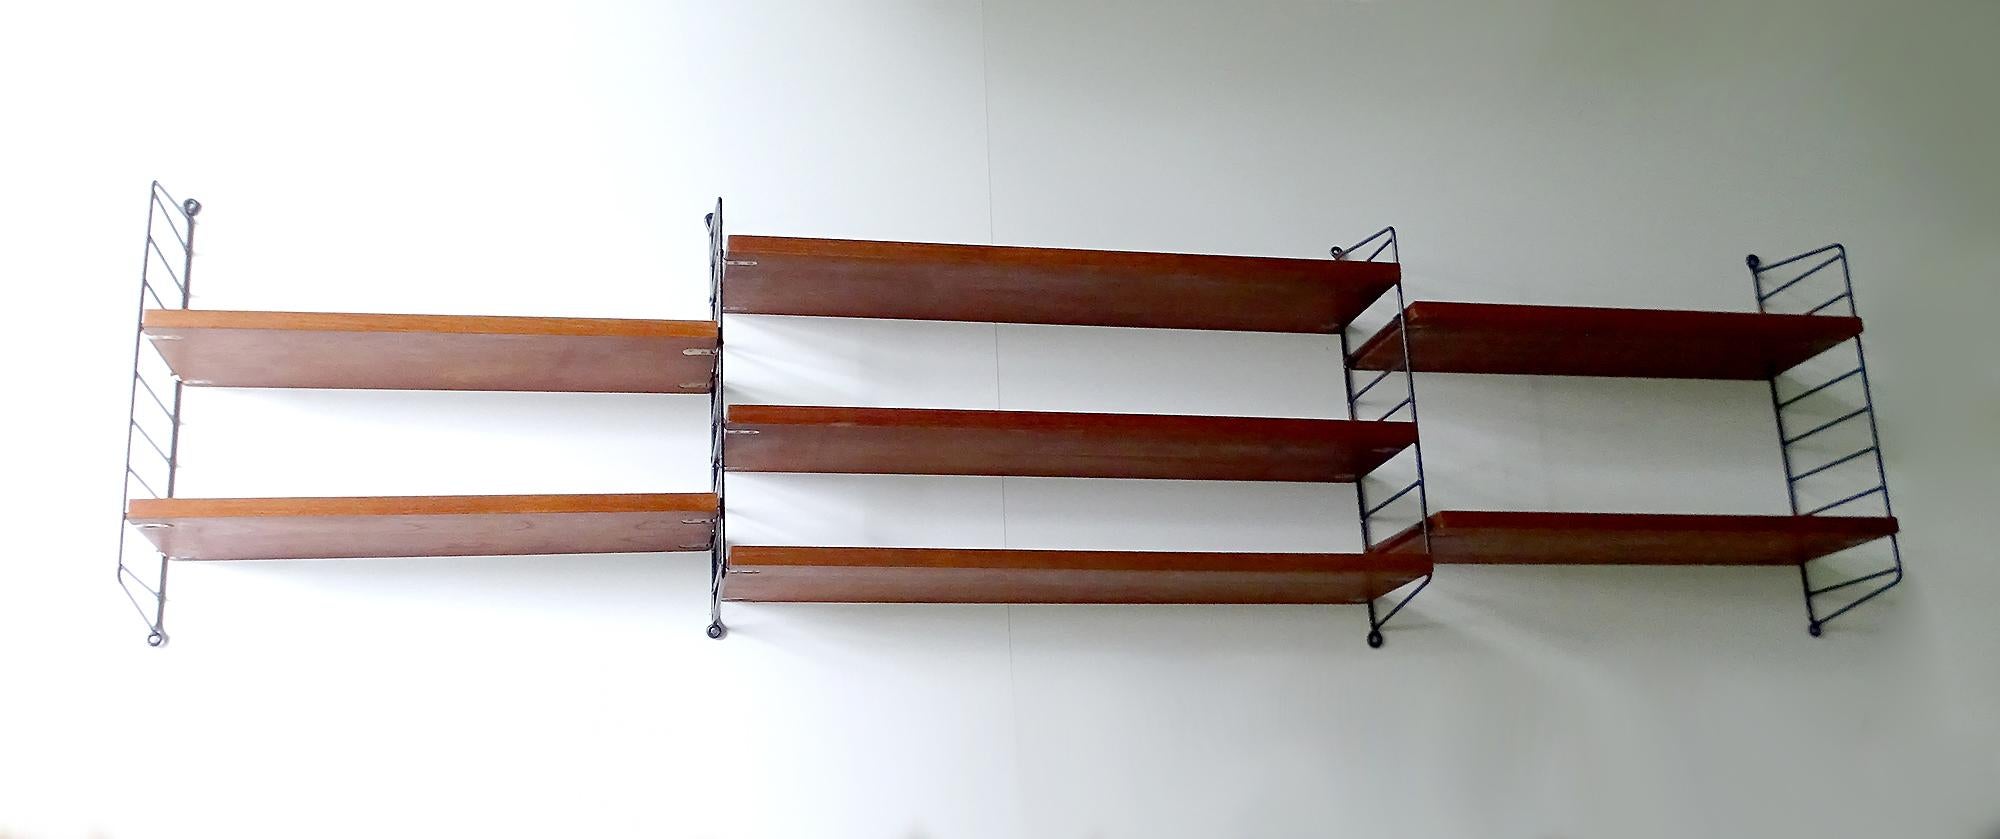 Original 1960s Danish modern Nisse Strinning string rack made out of 7 wooden elements shelves (4 small and 3 large) with 4 strings ladder, allowing for many possible combination, this is a large combo at close to 2 m / 78 in width when all put